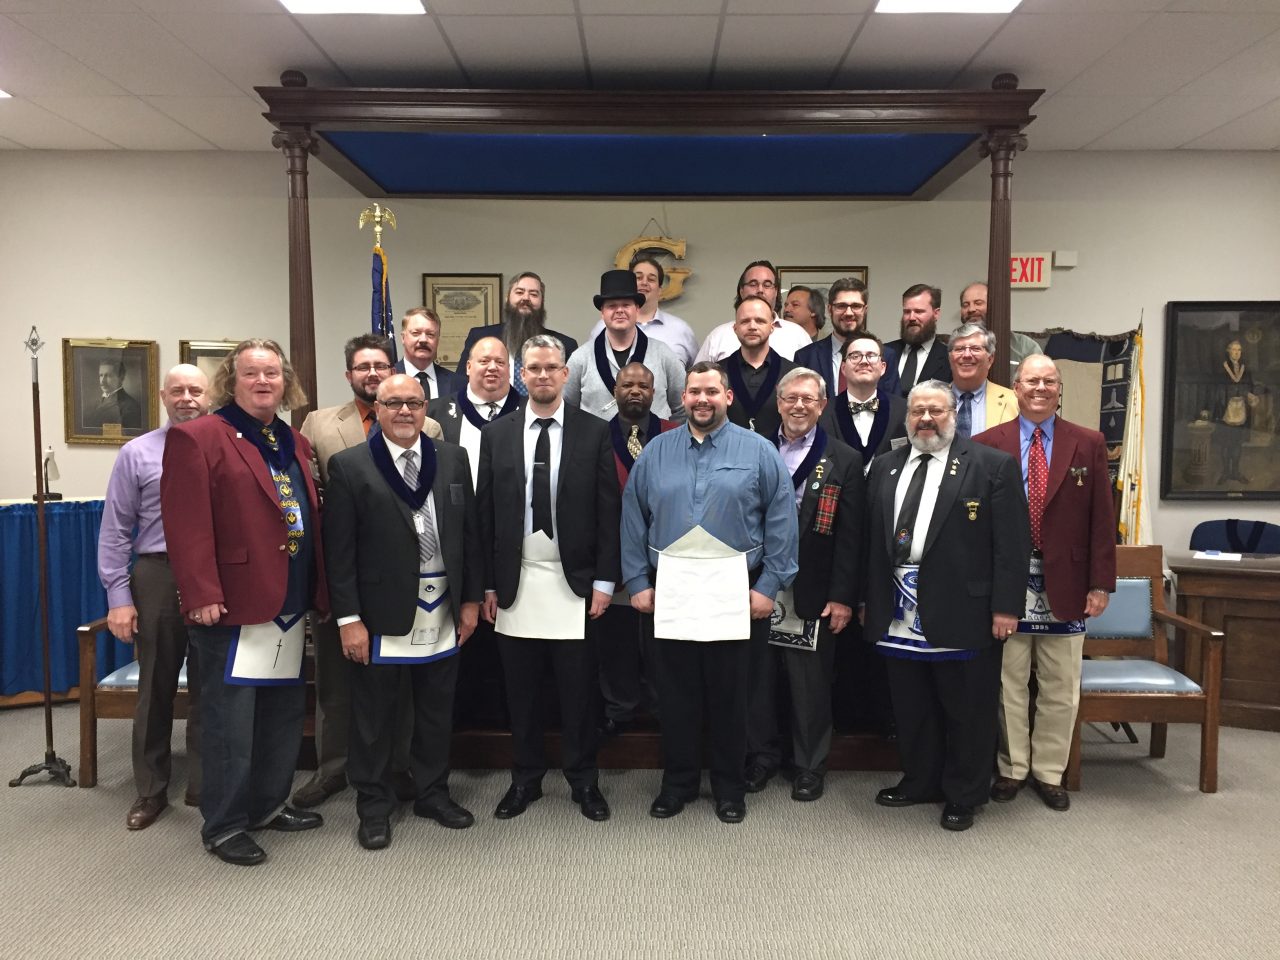 New EA Brothers – March 05, 2019 – Congratulations!